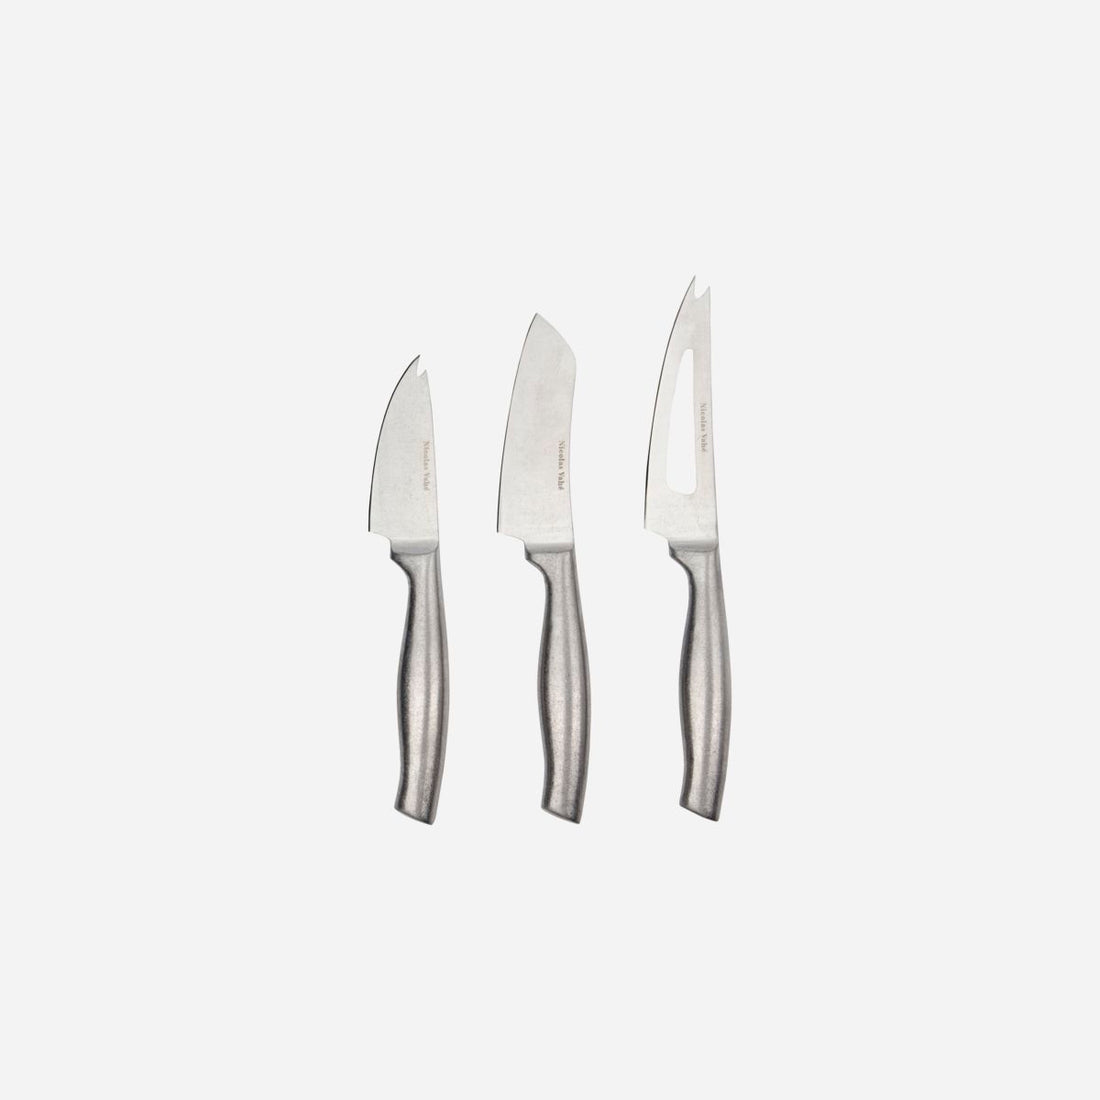 Nicolas Vahe cheese knives, fromage